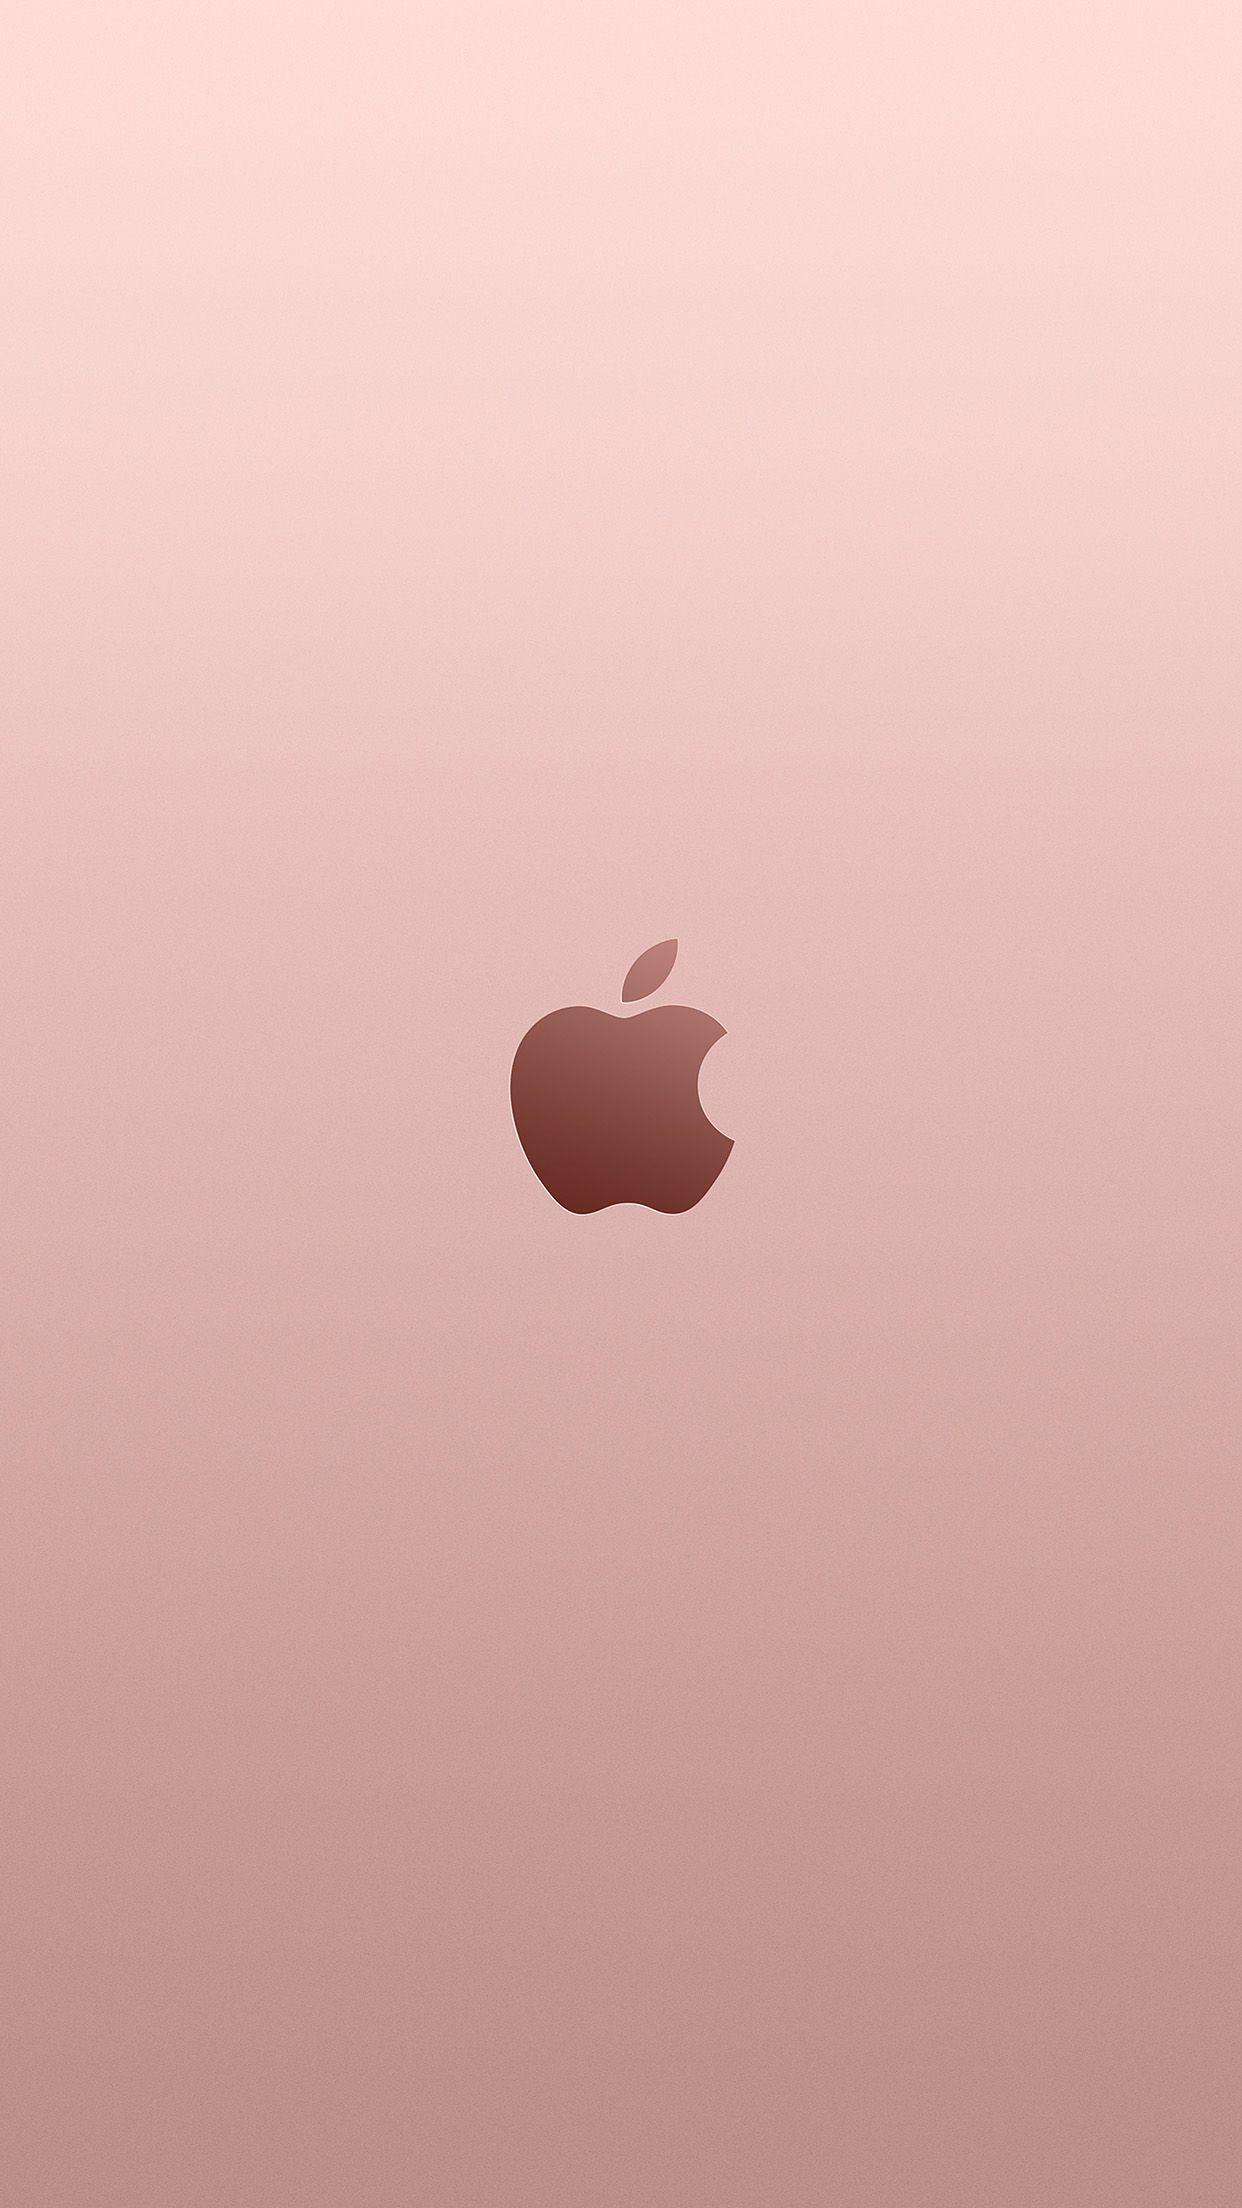 Apple 4K Ultra HD Wallpapers, HD Apple 3840x2160 Backgrounds, Free Images  Download